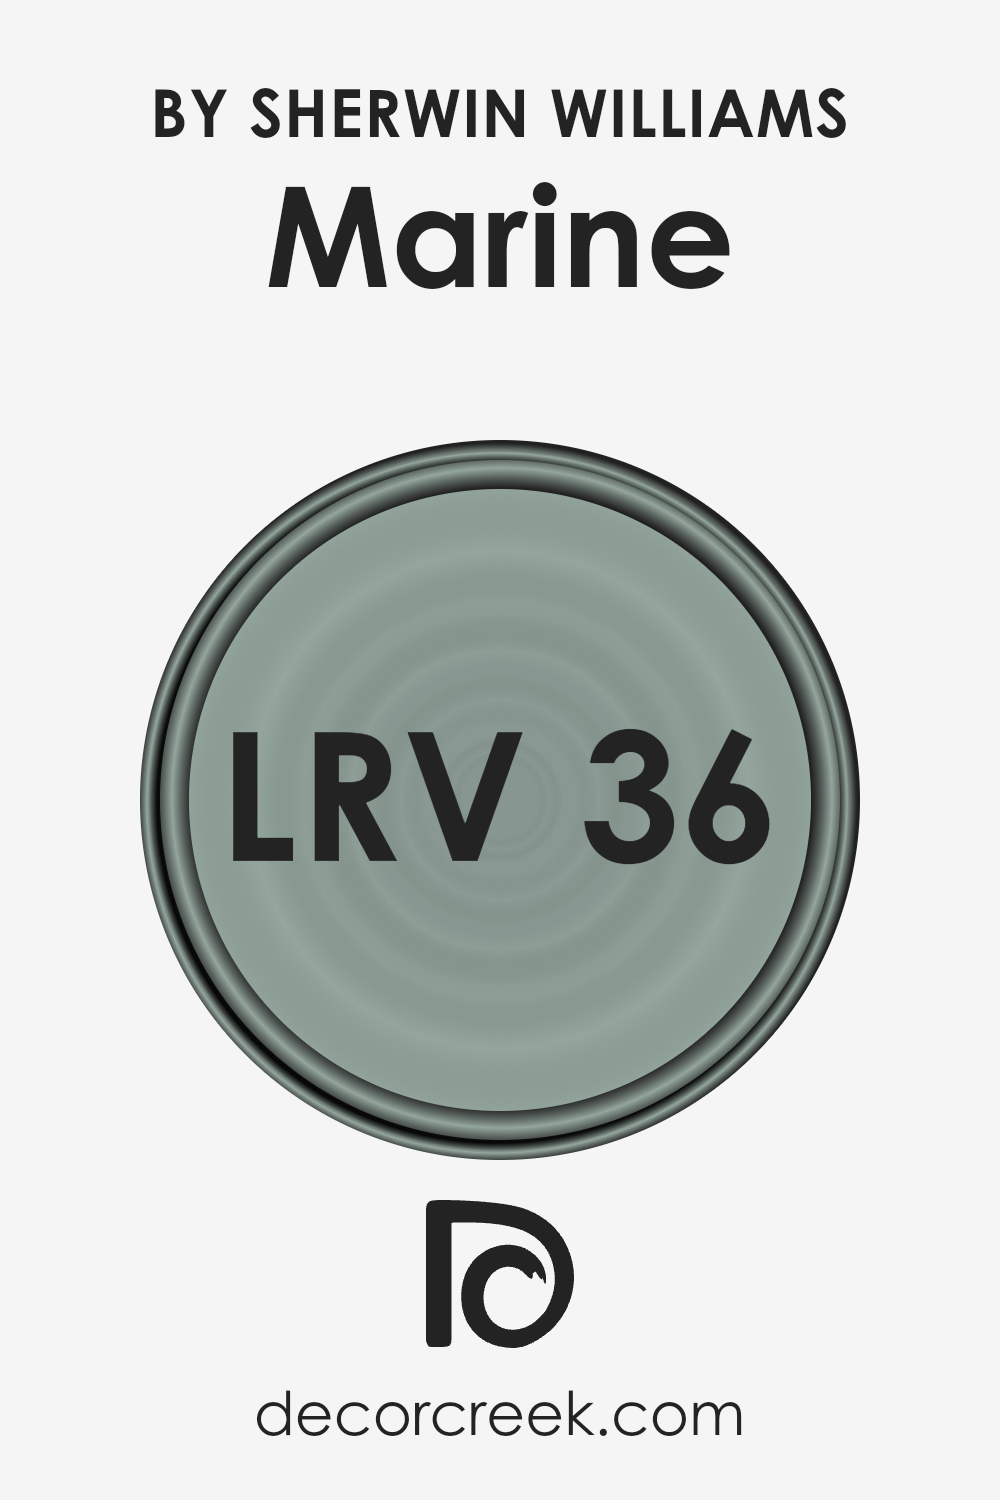 what_is_the_lrv_of_marine_sw_9659